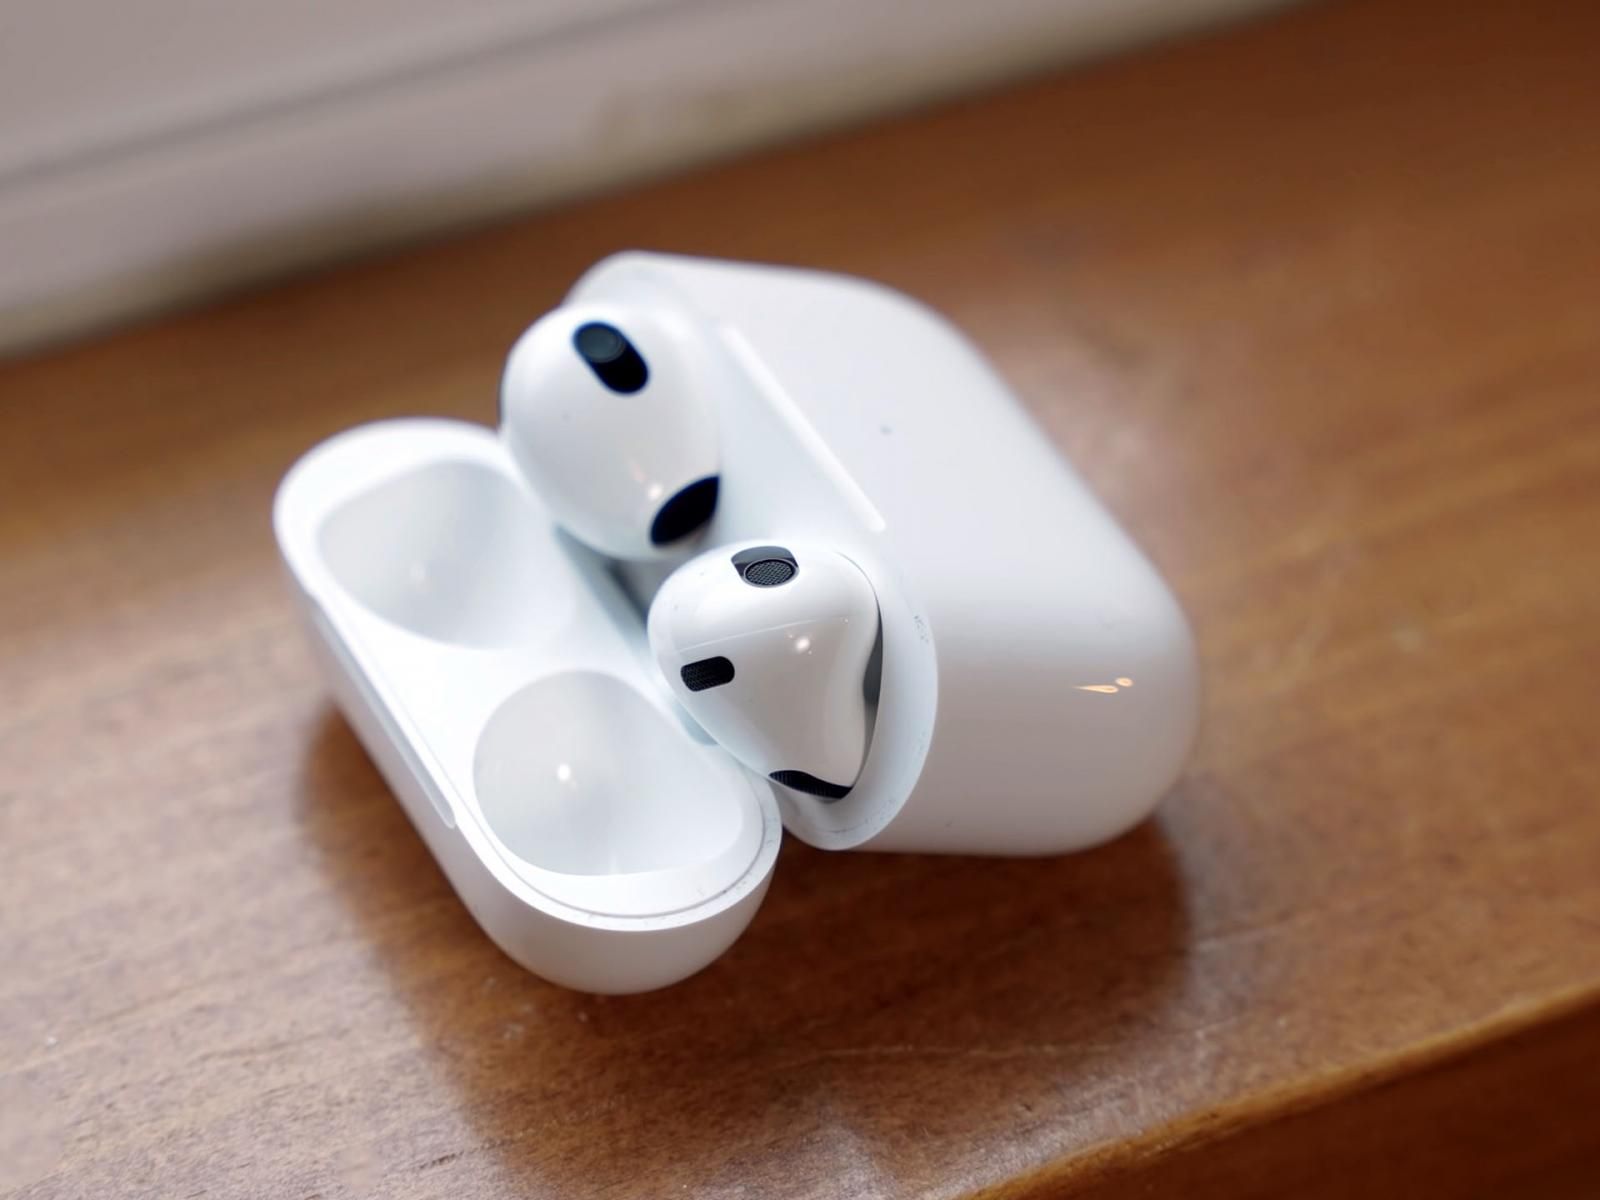 Apple is giving us new AirPods, finally